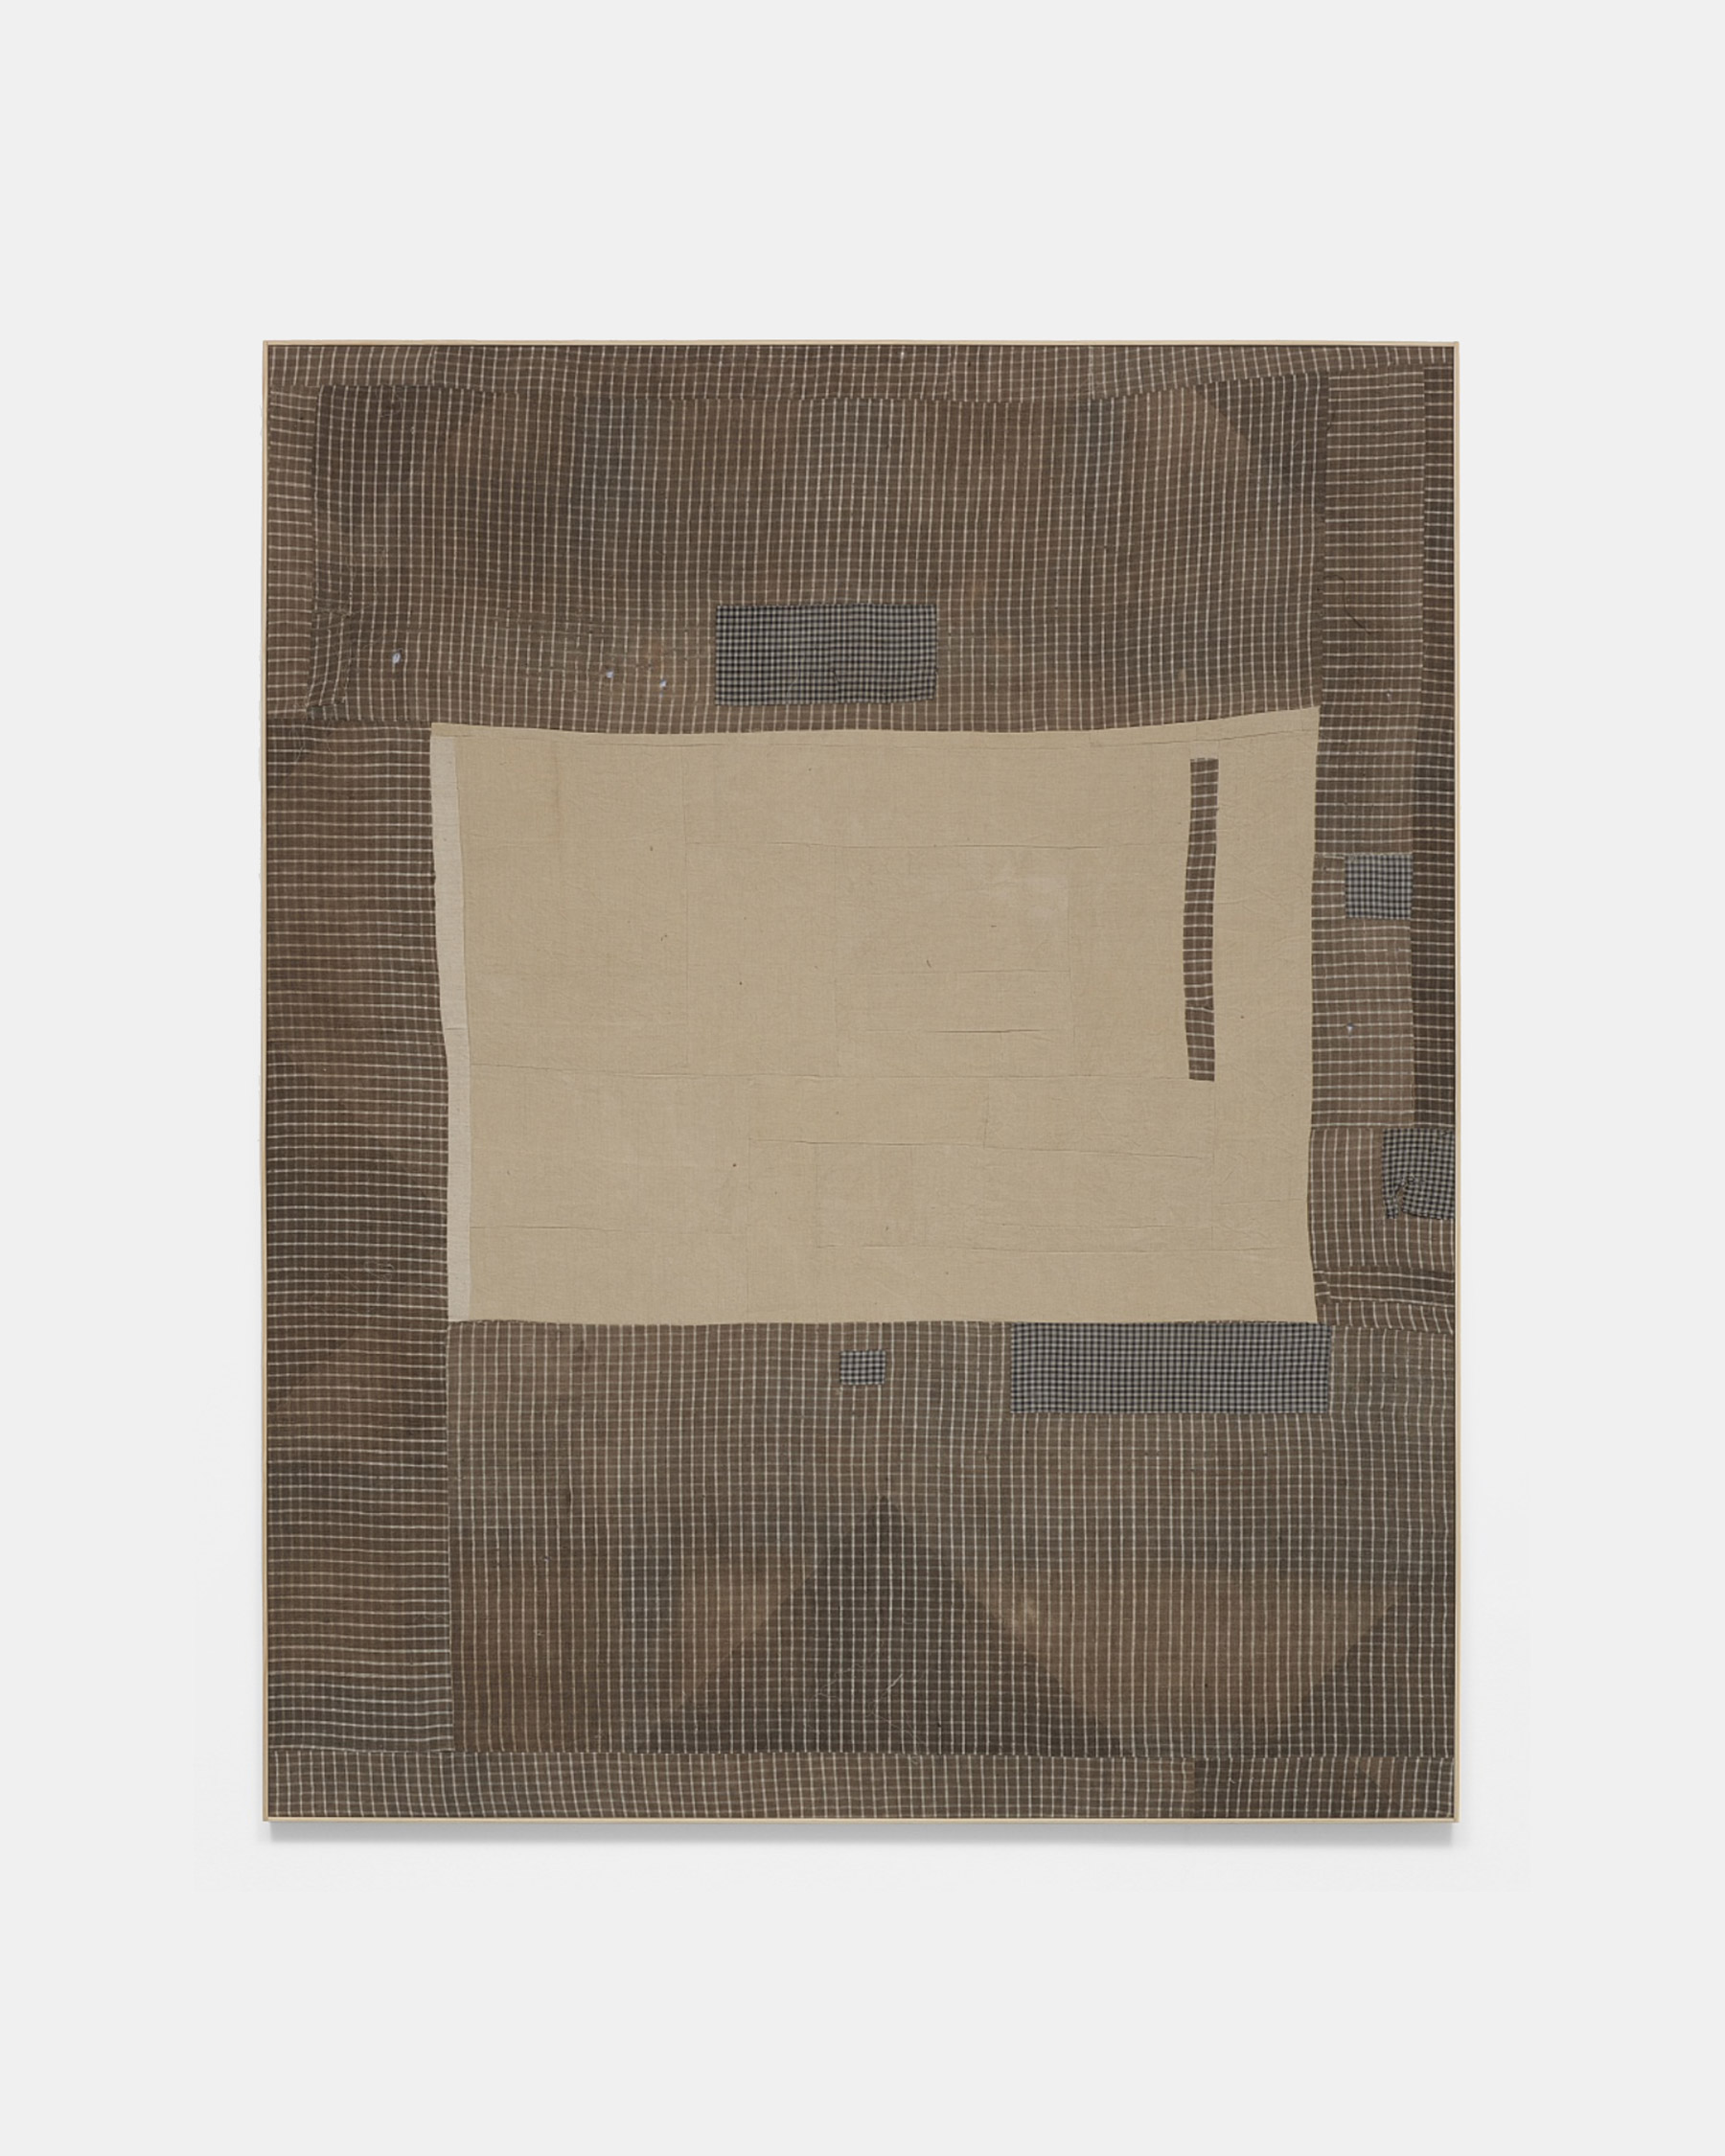 Lawrence Calver, Scouts, 2020, stitched linen, 262 x 212 cm © The Artist, Image Courtesy De Brock Gallery